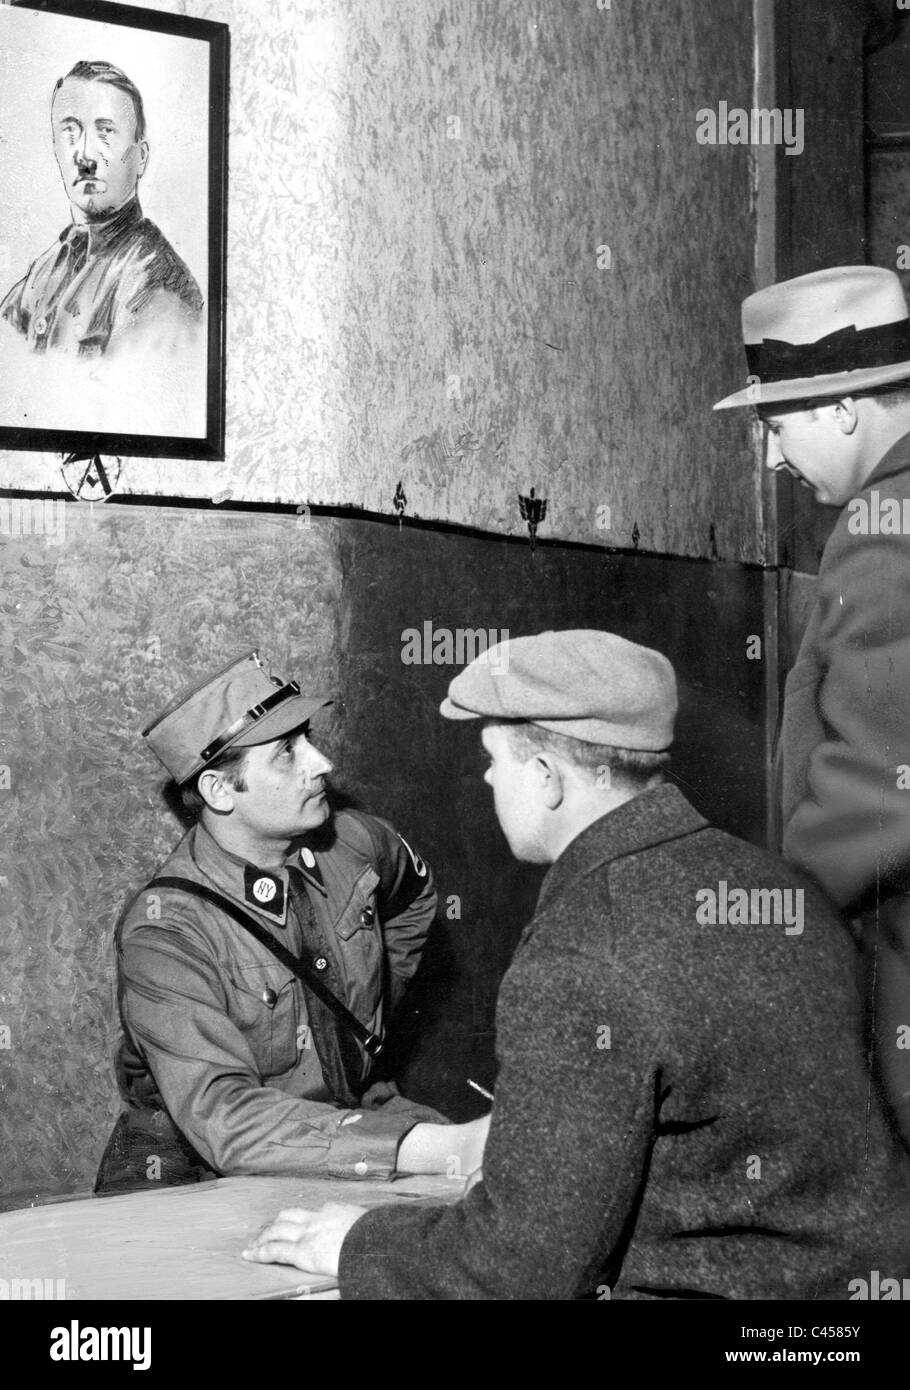 Recruiting station of the SA in Berlin, 1932 Stock Photo